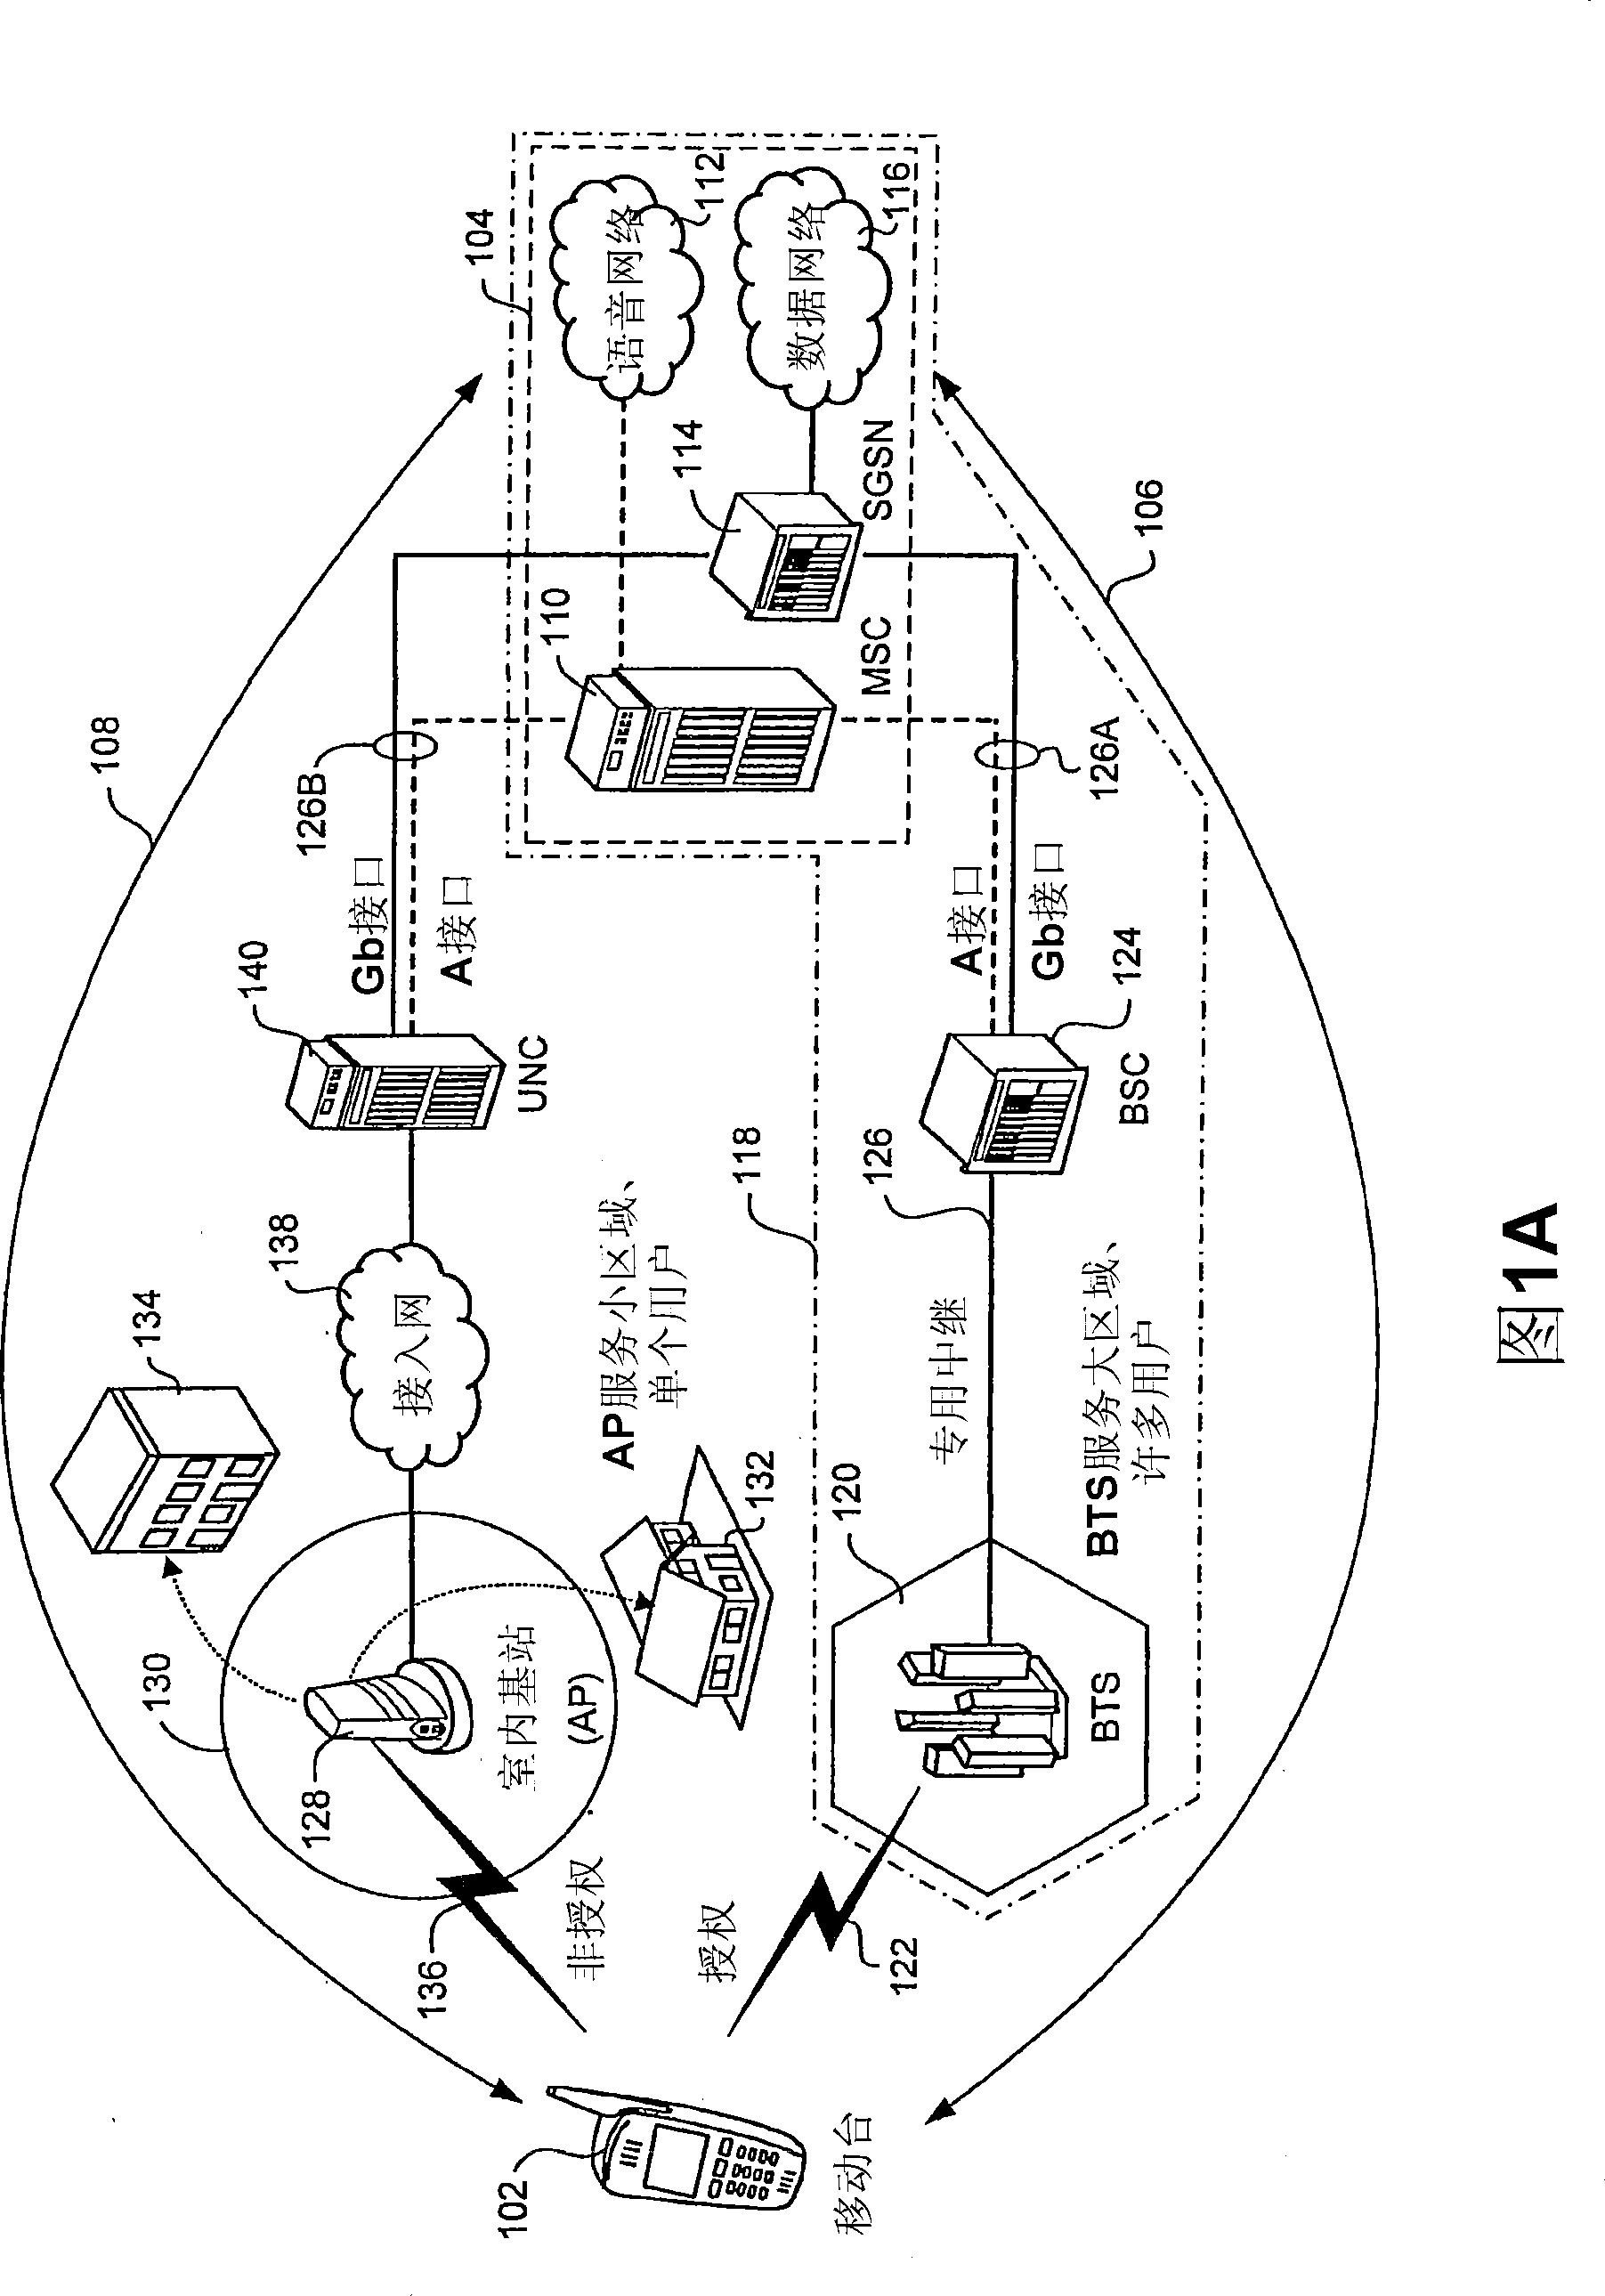 Messaging between an mobile station and network controller